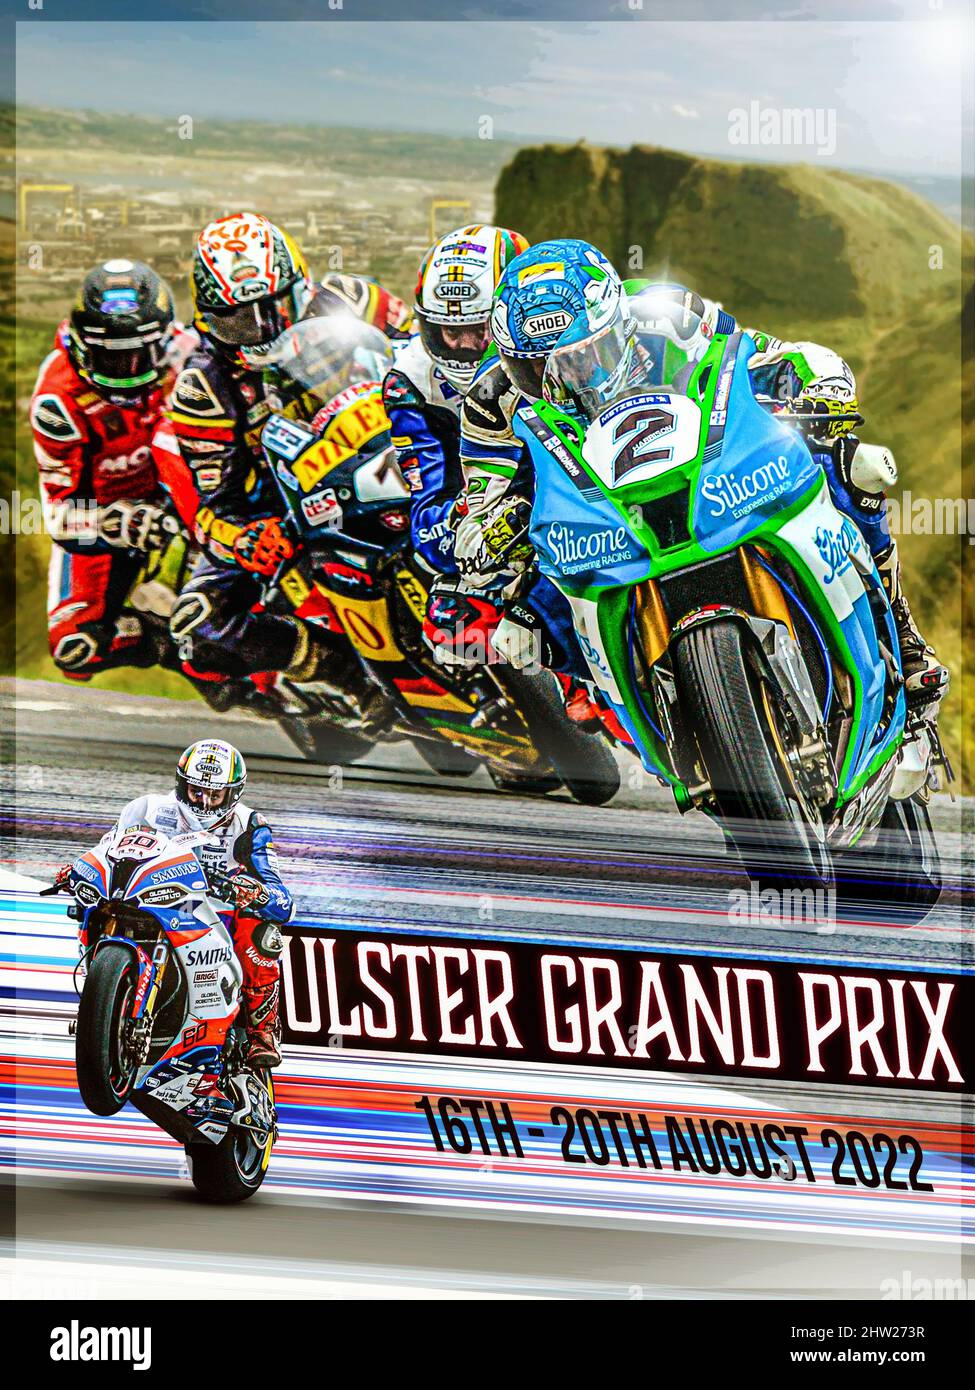 Ulster Grand Prix 2022 Race Poster Stock Photo